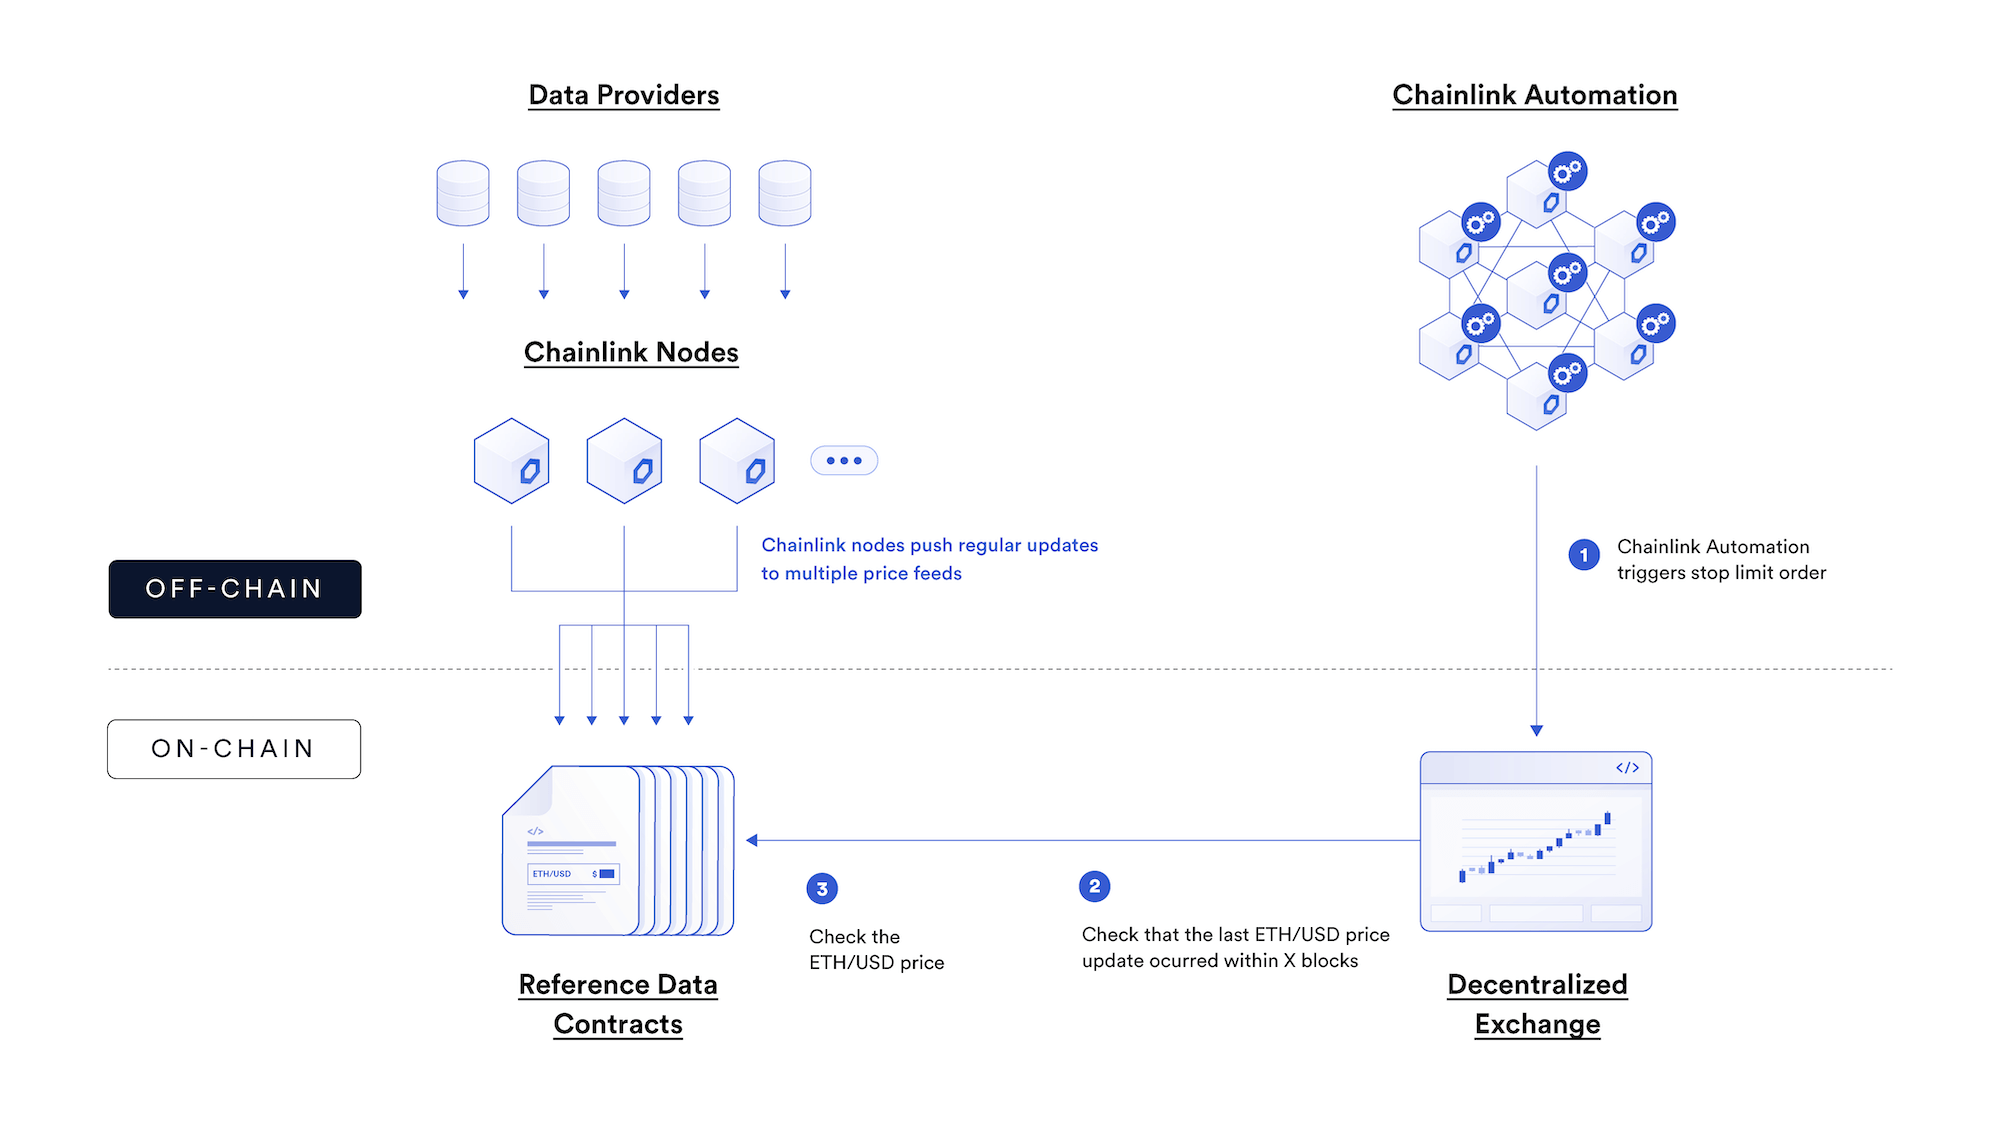 Diagram showing how Chainlink secures decentralized exchanges